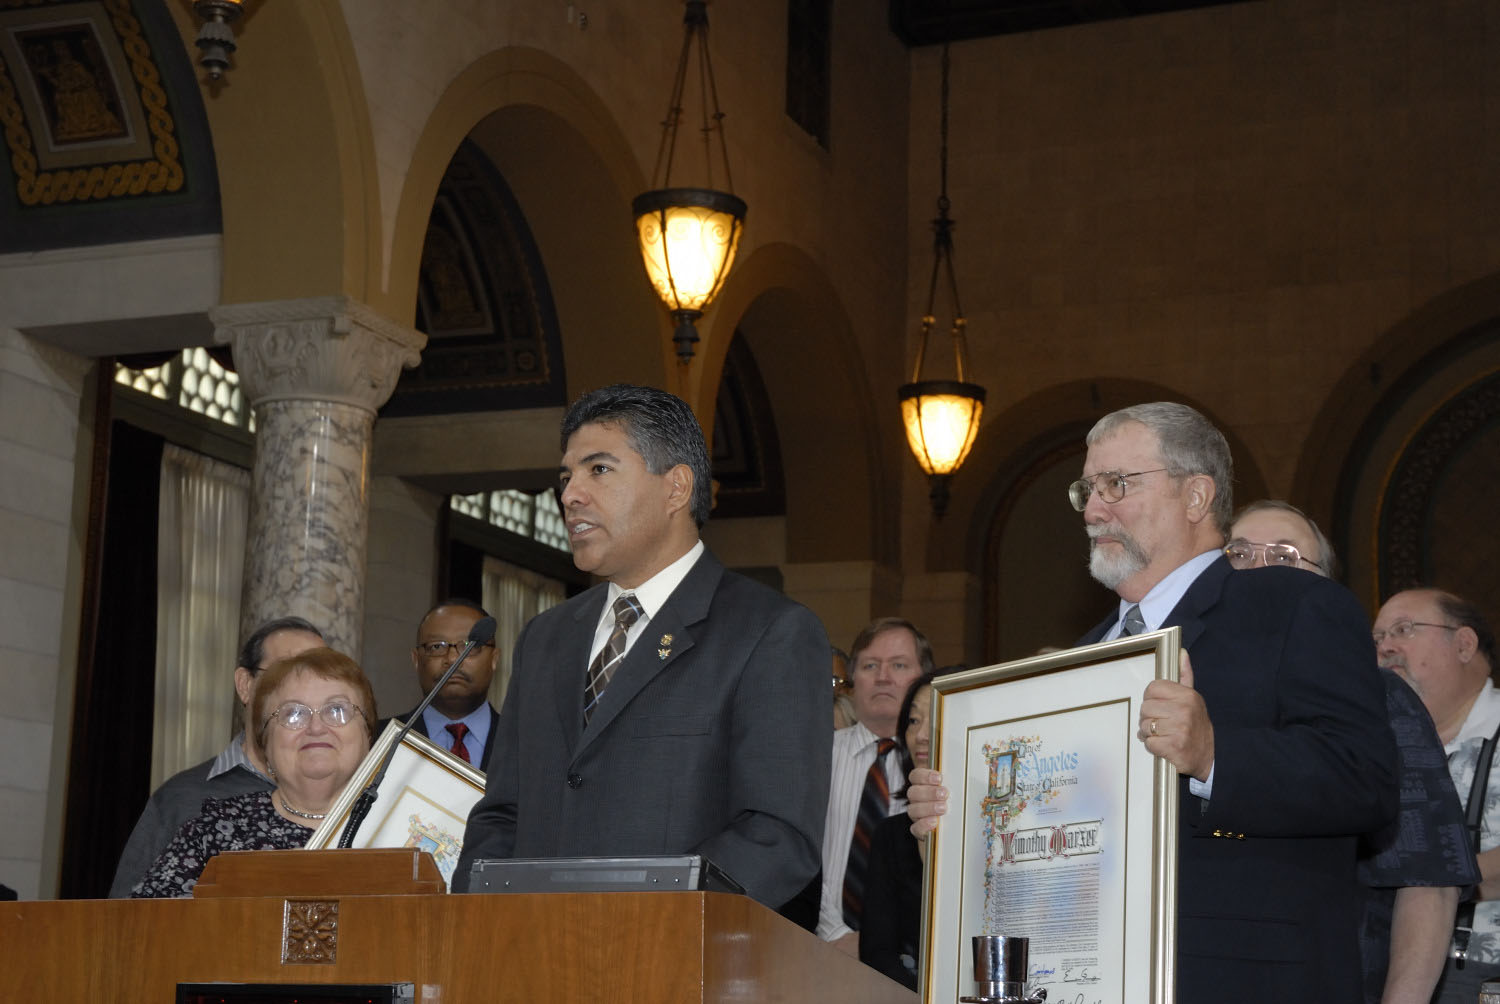 I am standing before The Council of The City of Los Angeles being recognized by a Council Resolution in October of 2009. I saved the Taxpayers of Los Angeles over $25M on Public Utility Costs paid by The City.